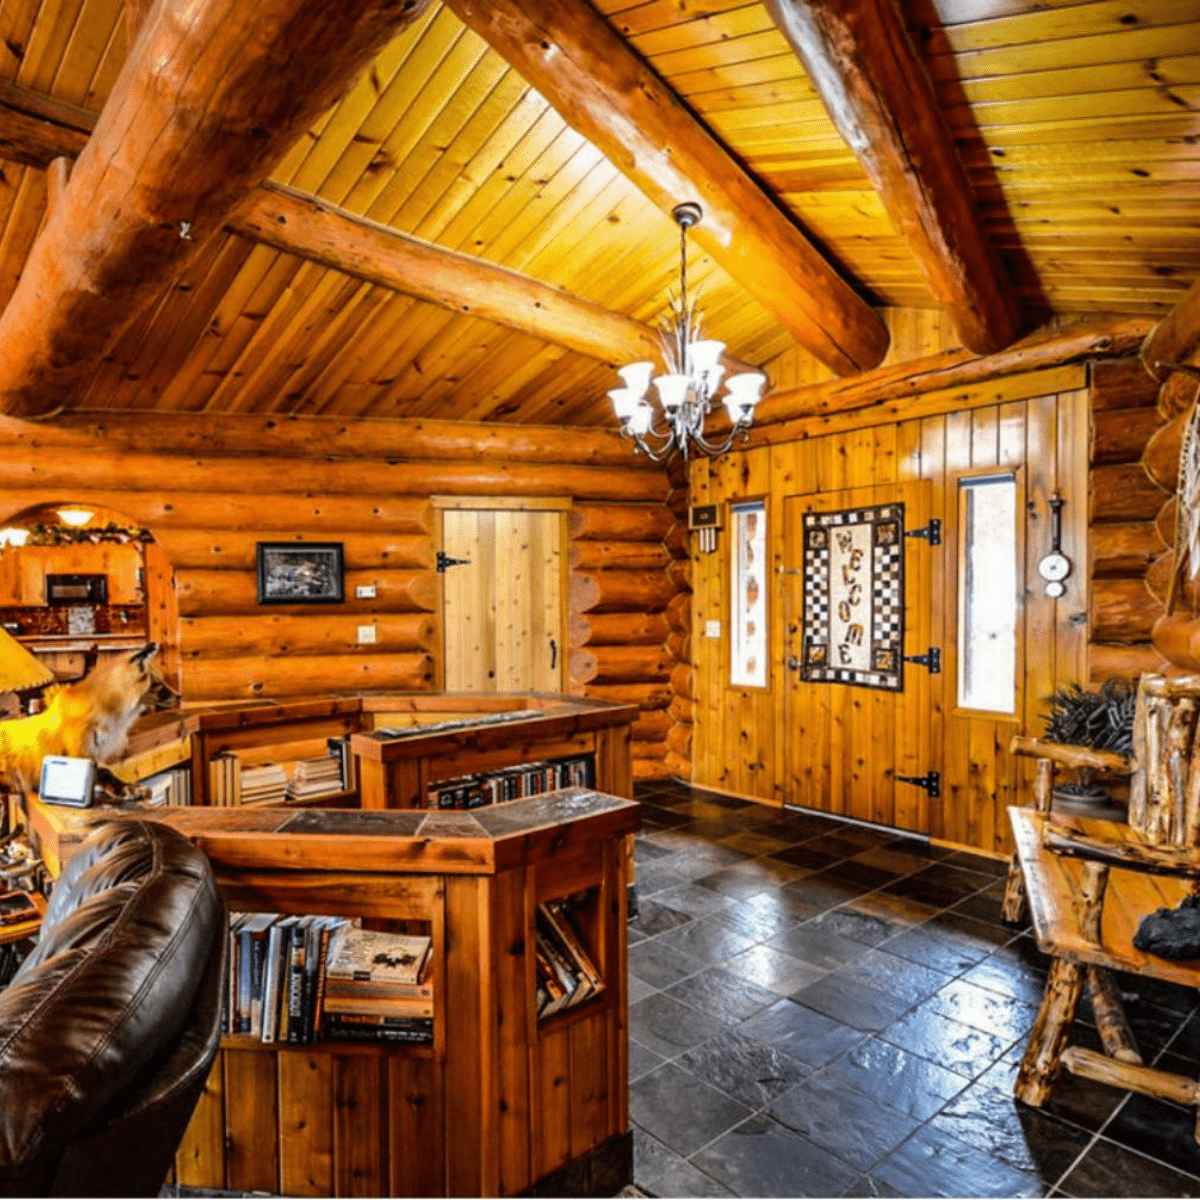 All About Decorating A Log Cabin